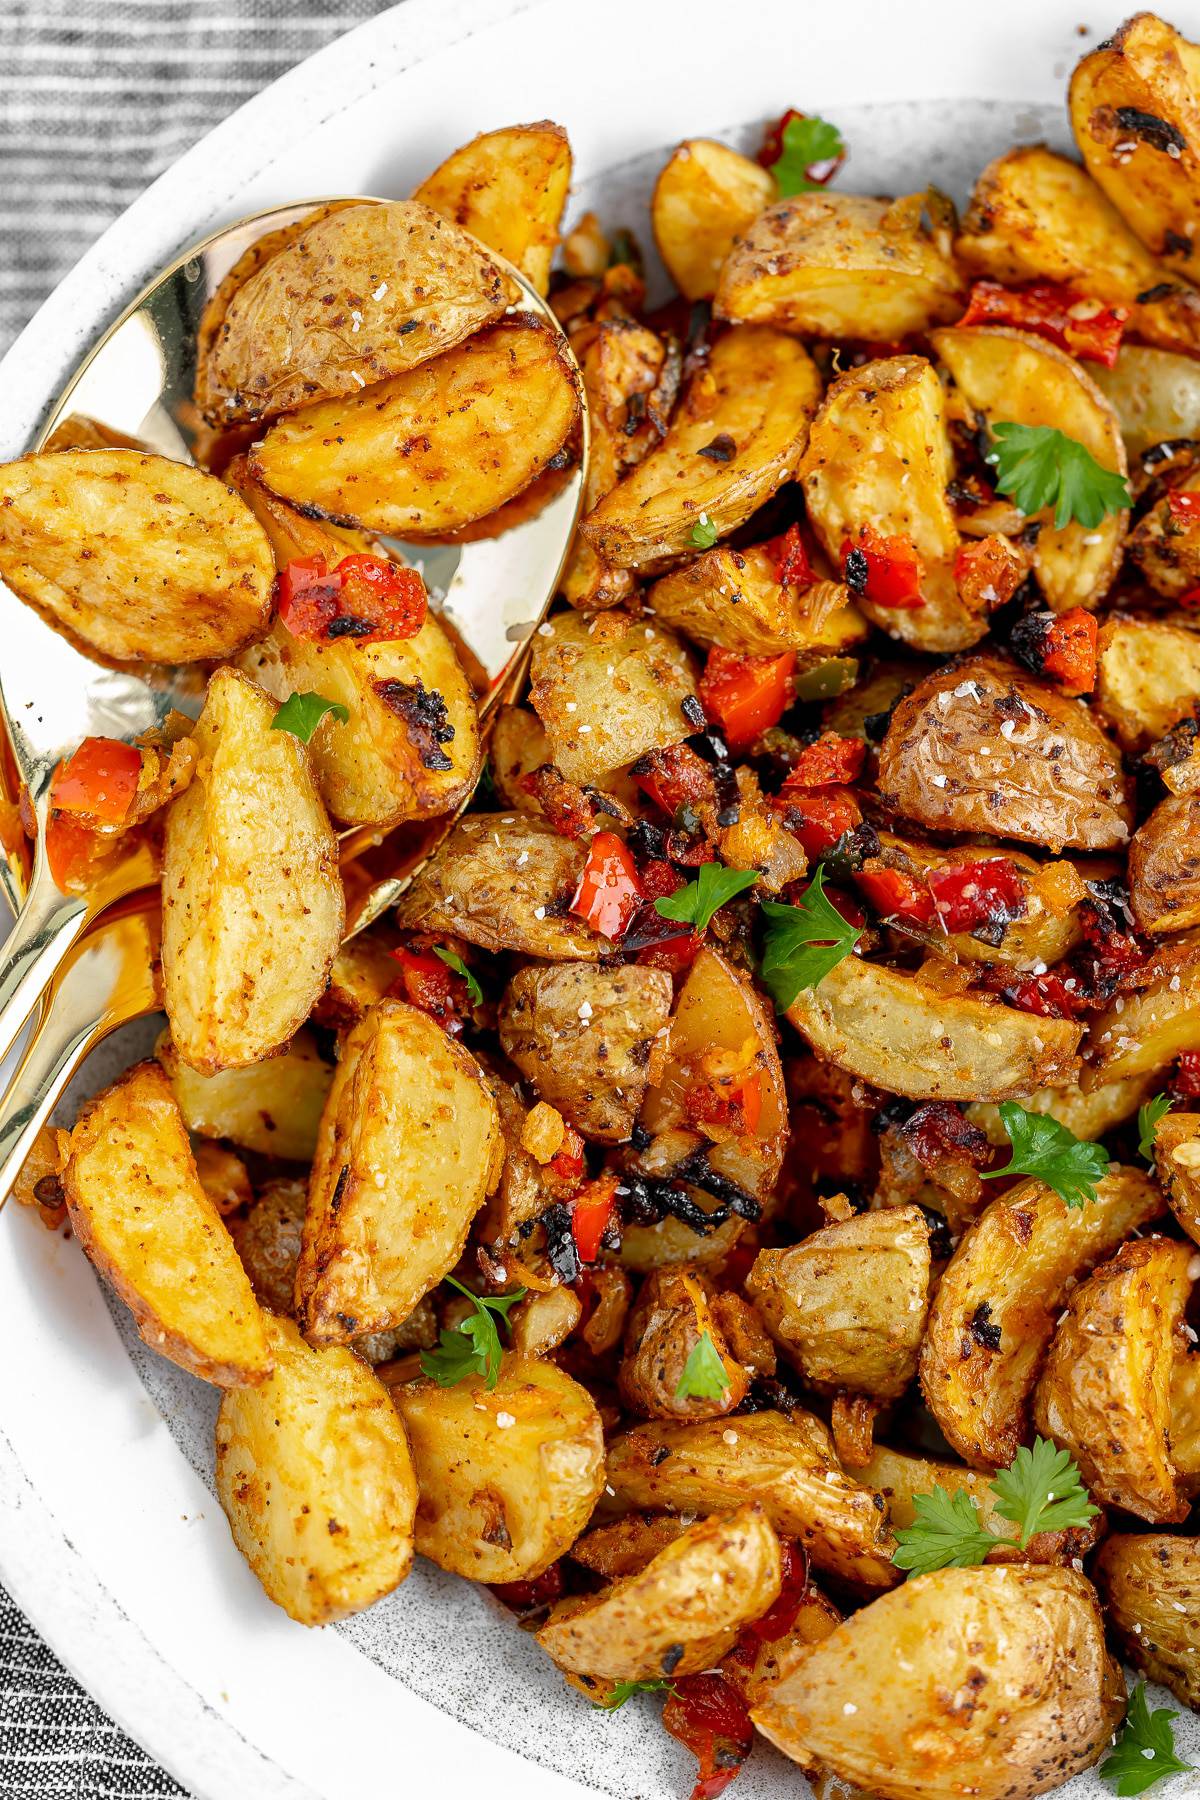 Southern home fries in a plate, with two serving spoons.